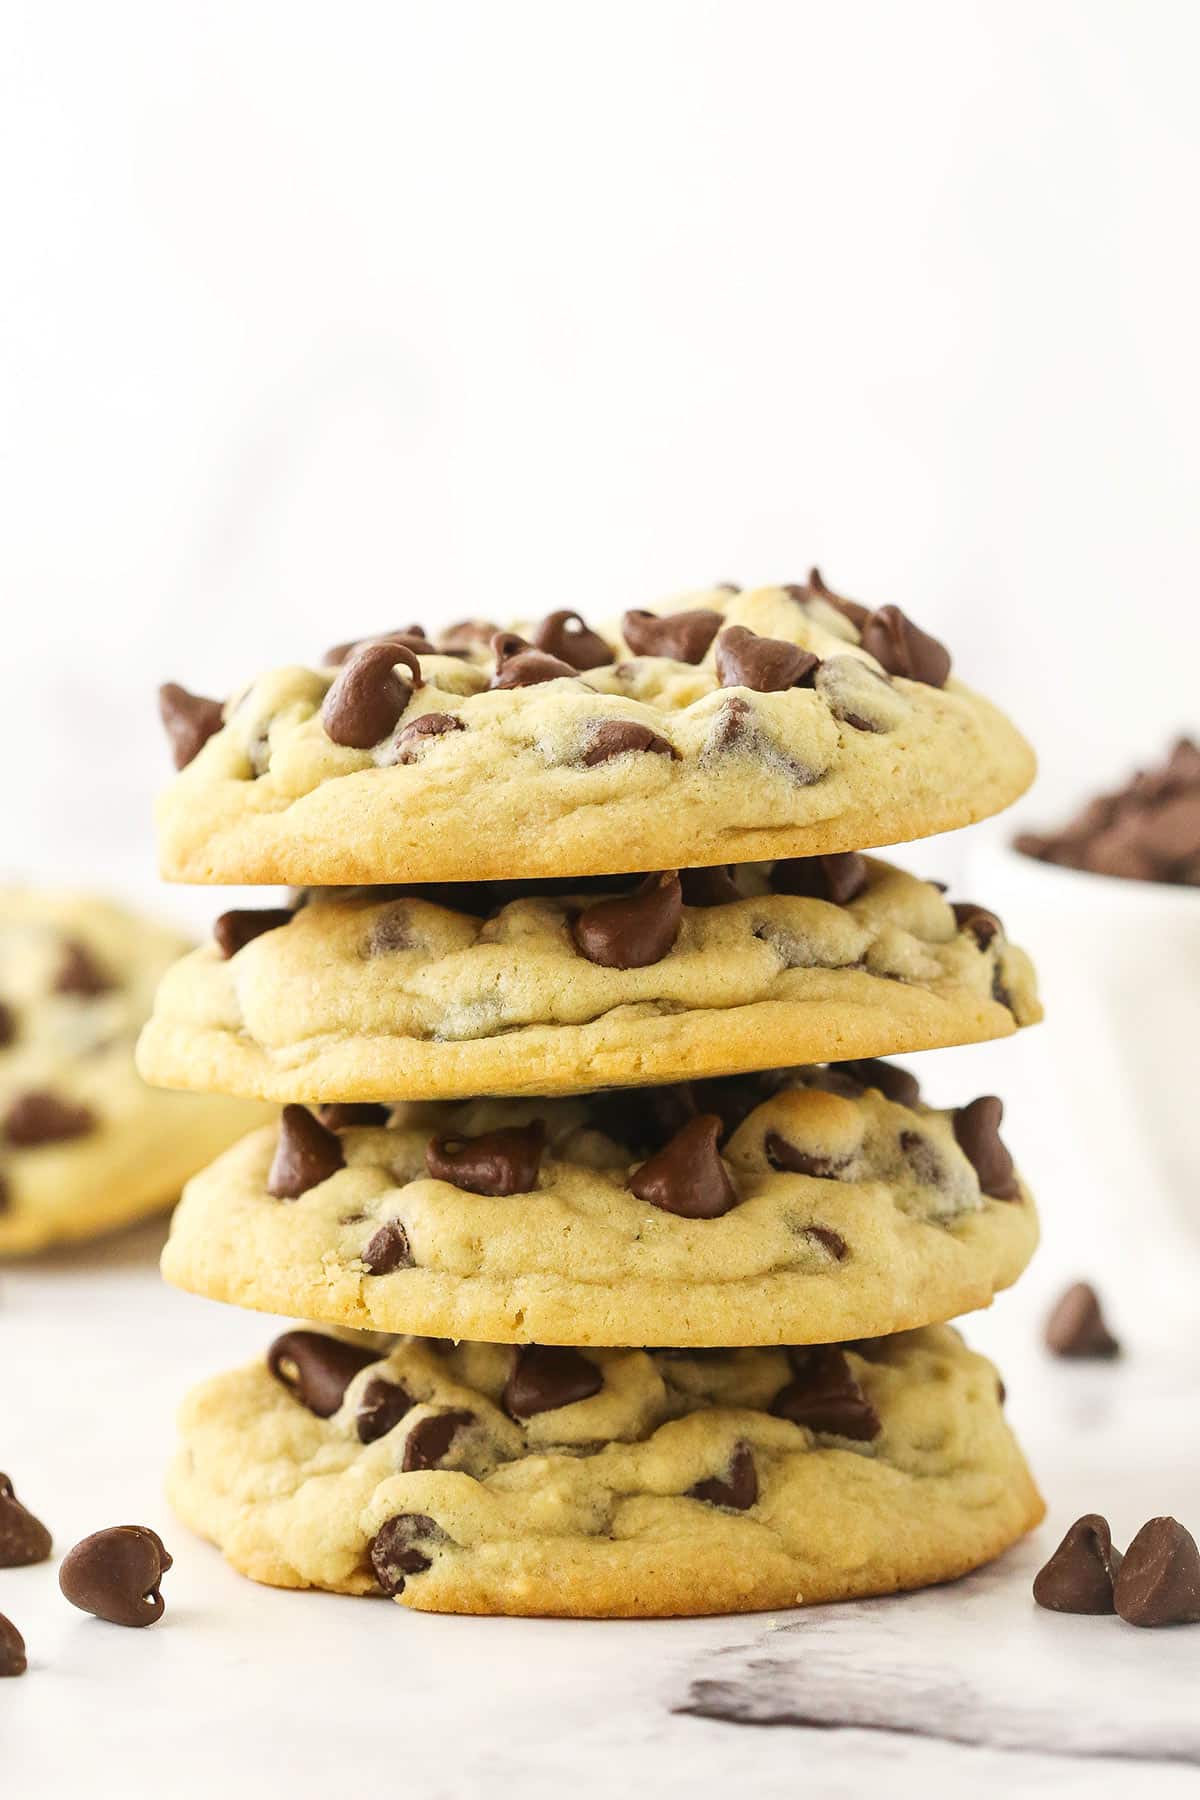 Four cooled chocolate chip cookies stacked on top of one another